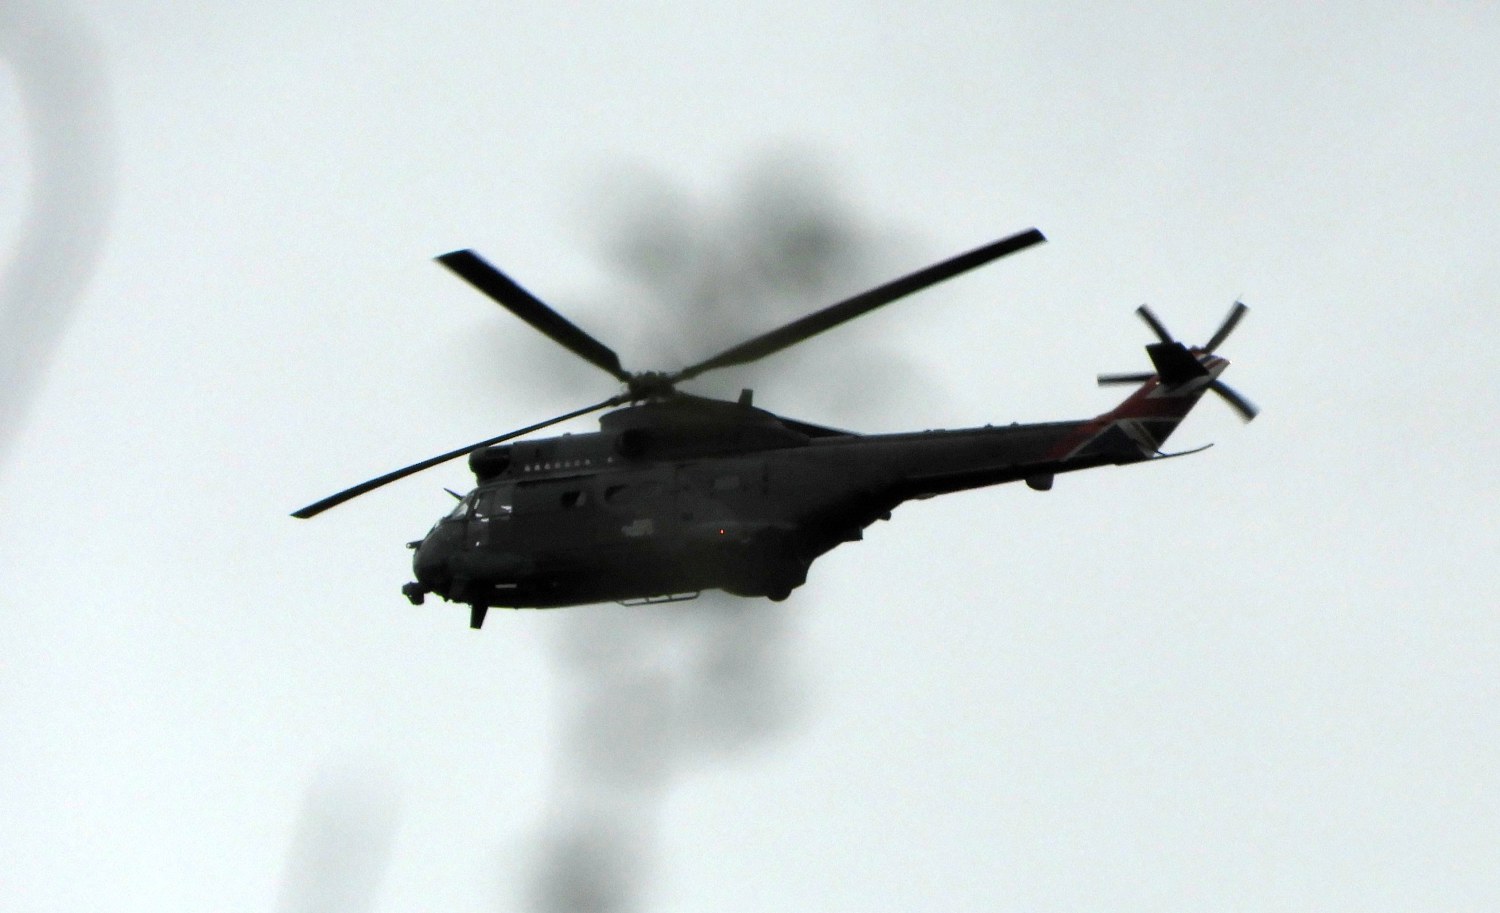 Helicopter over the hedgerow